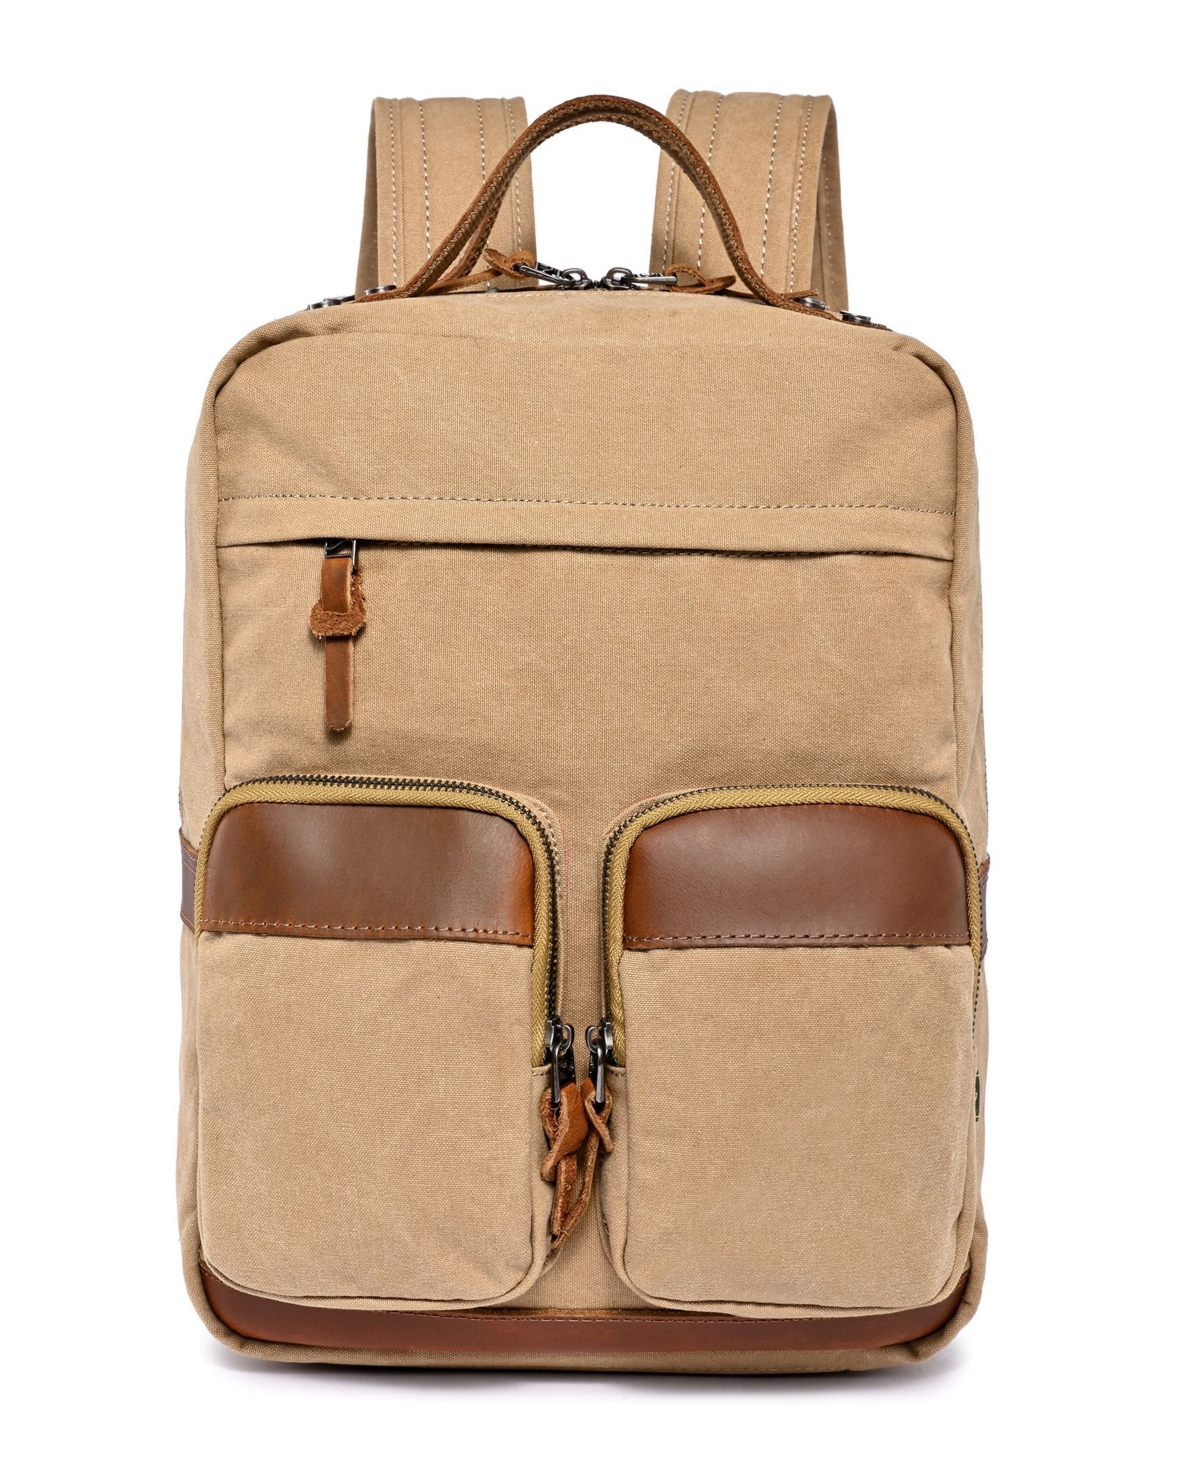 Foothill Ranch Canvas Backpack - Teal